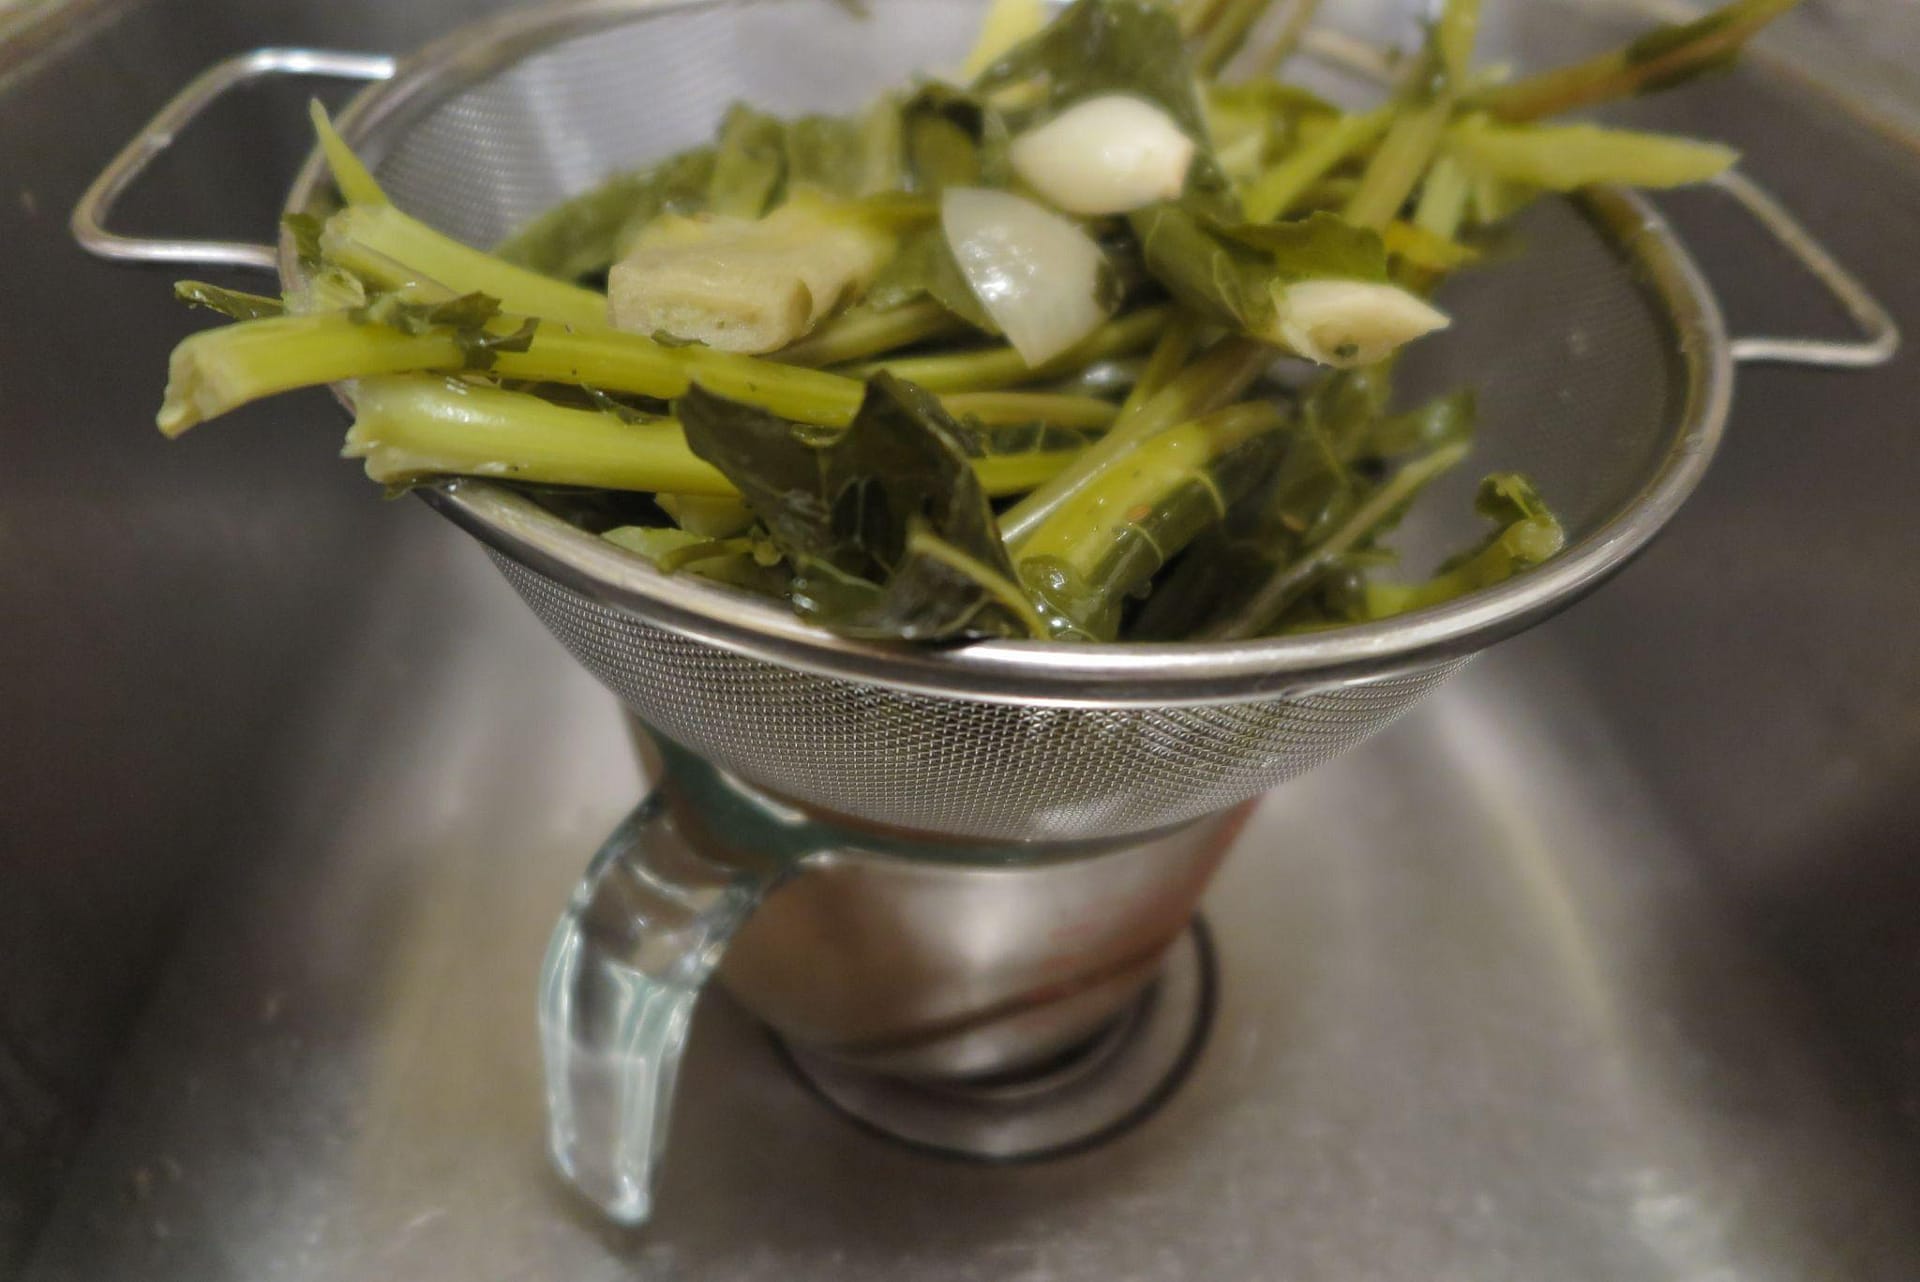 Metal strainer of cooked veggie scraps set on a large glass measuring cup in a sink